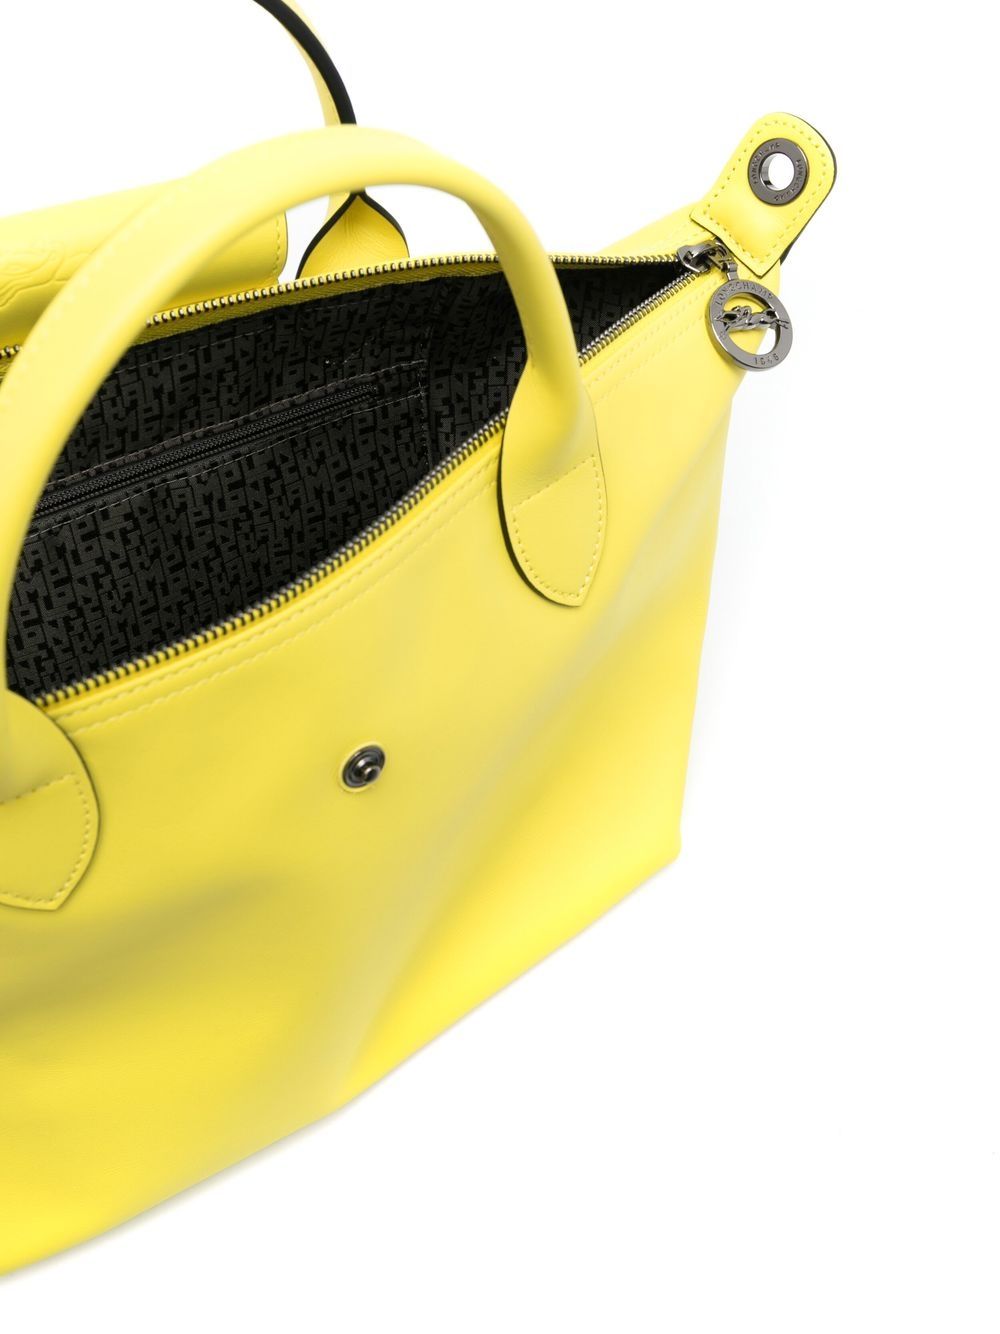 Longchamp BLE PLIAGE XTRA Pouch - Yellow Leather (Lemon) NEW with Tags